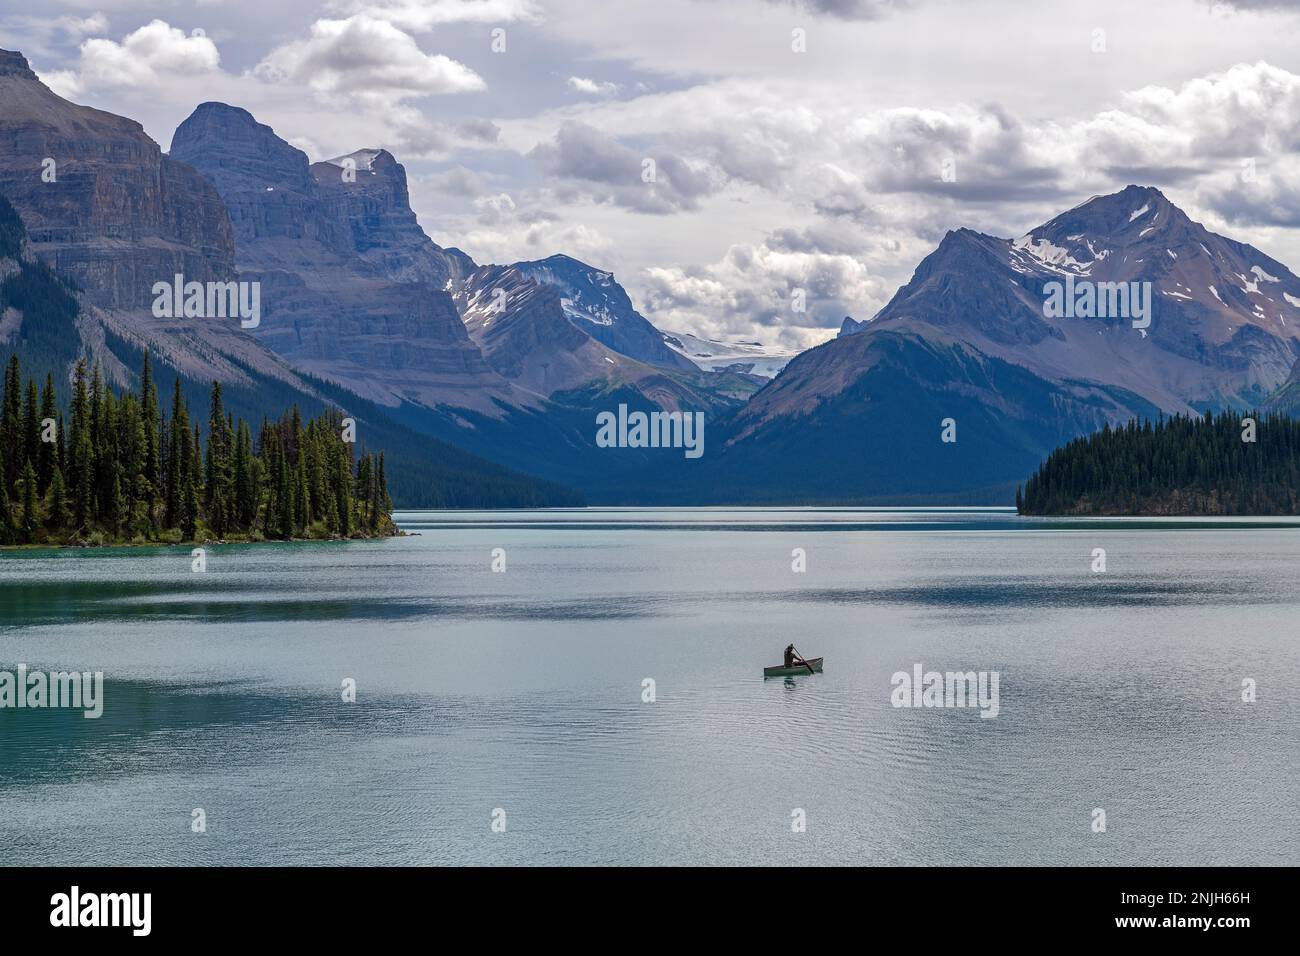 Man in canoe on Maligne Lake in the canadian rocky mountains, Jasper national park, Alberta, Canada. Stock Photo